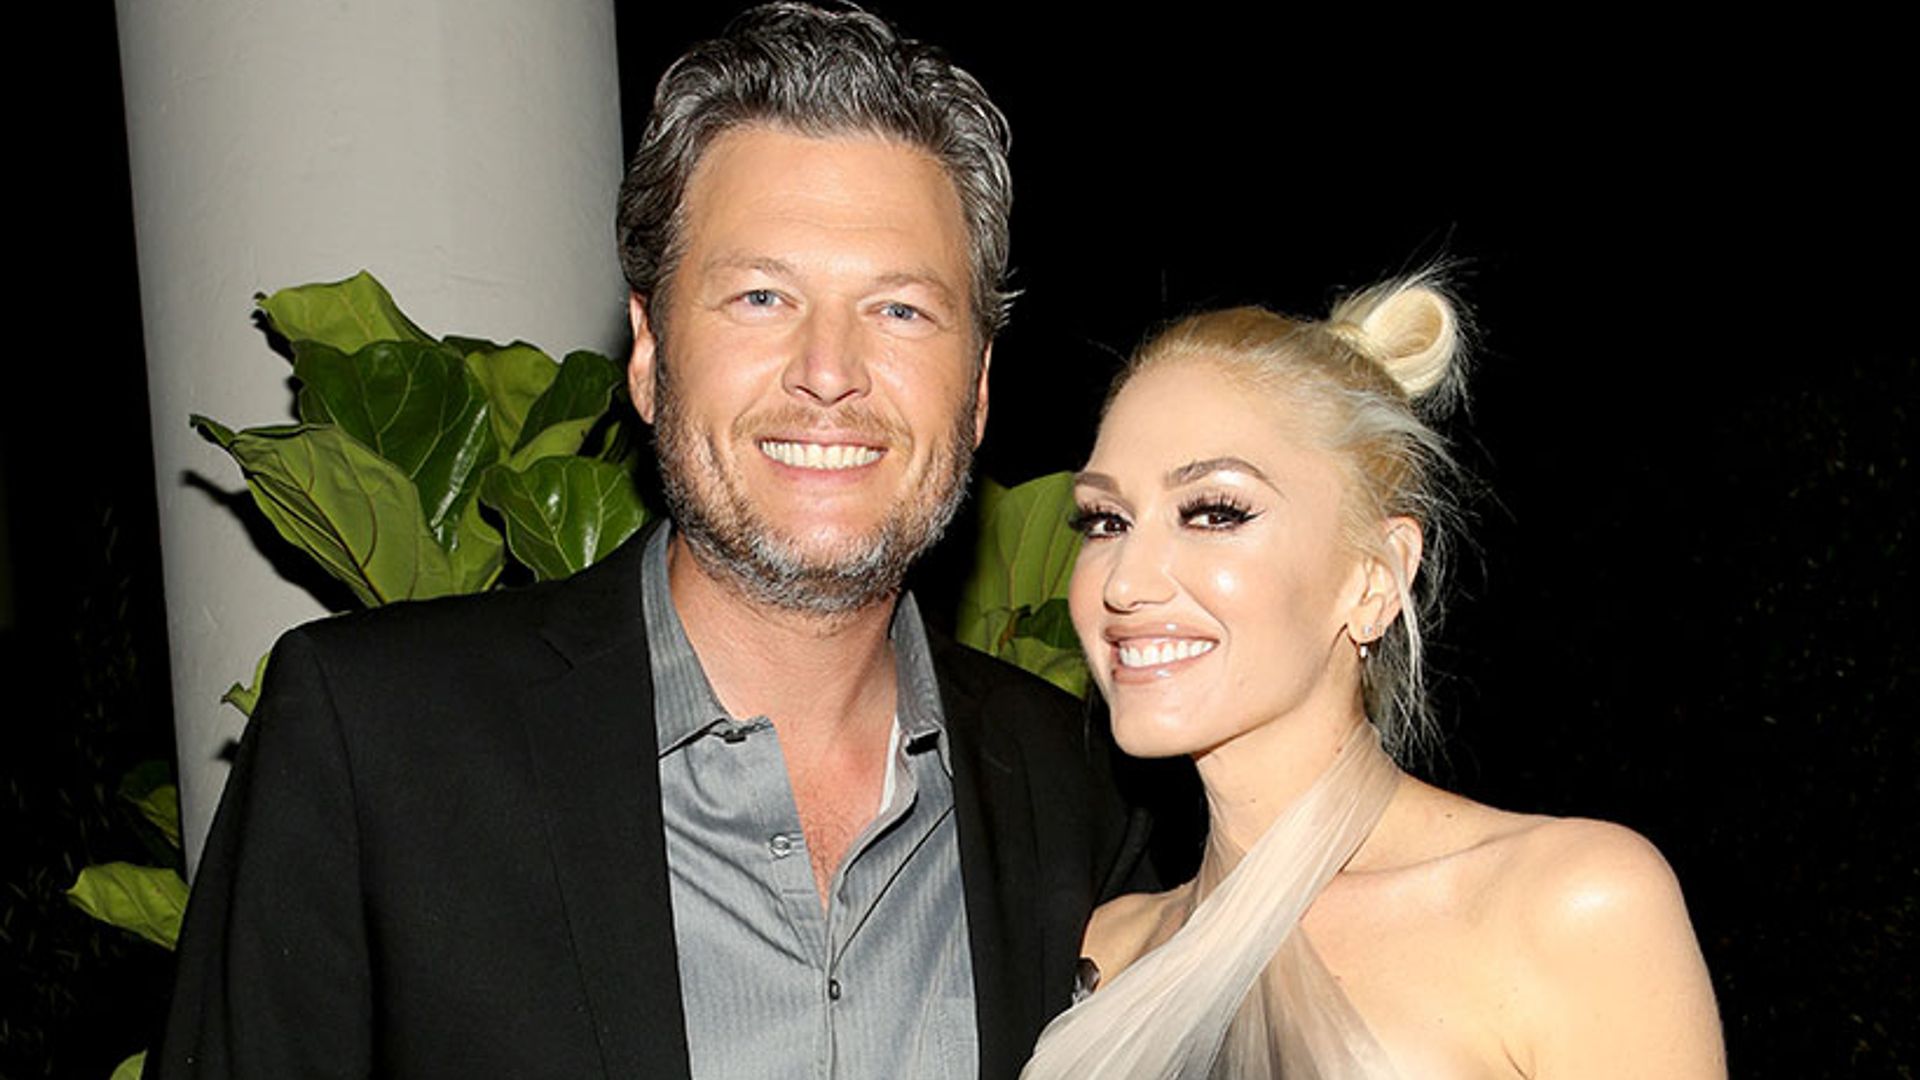 Gwen Stefani reveals working with boyfriend Blake Shelton on The Voice is a 'blessing'